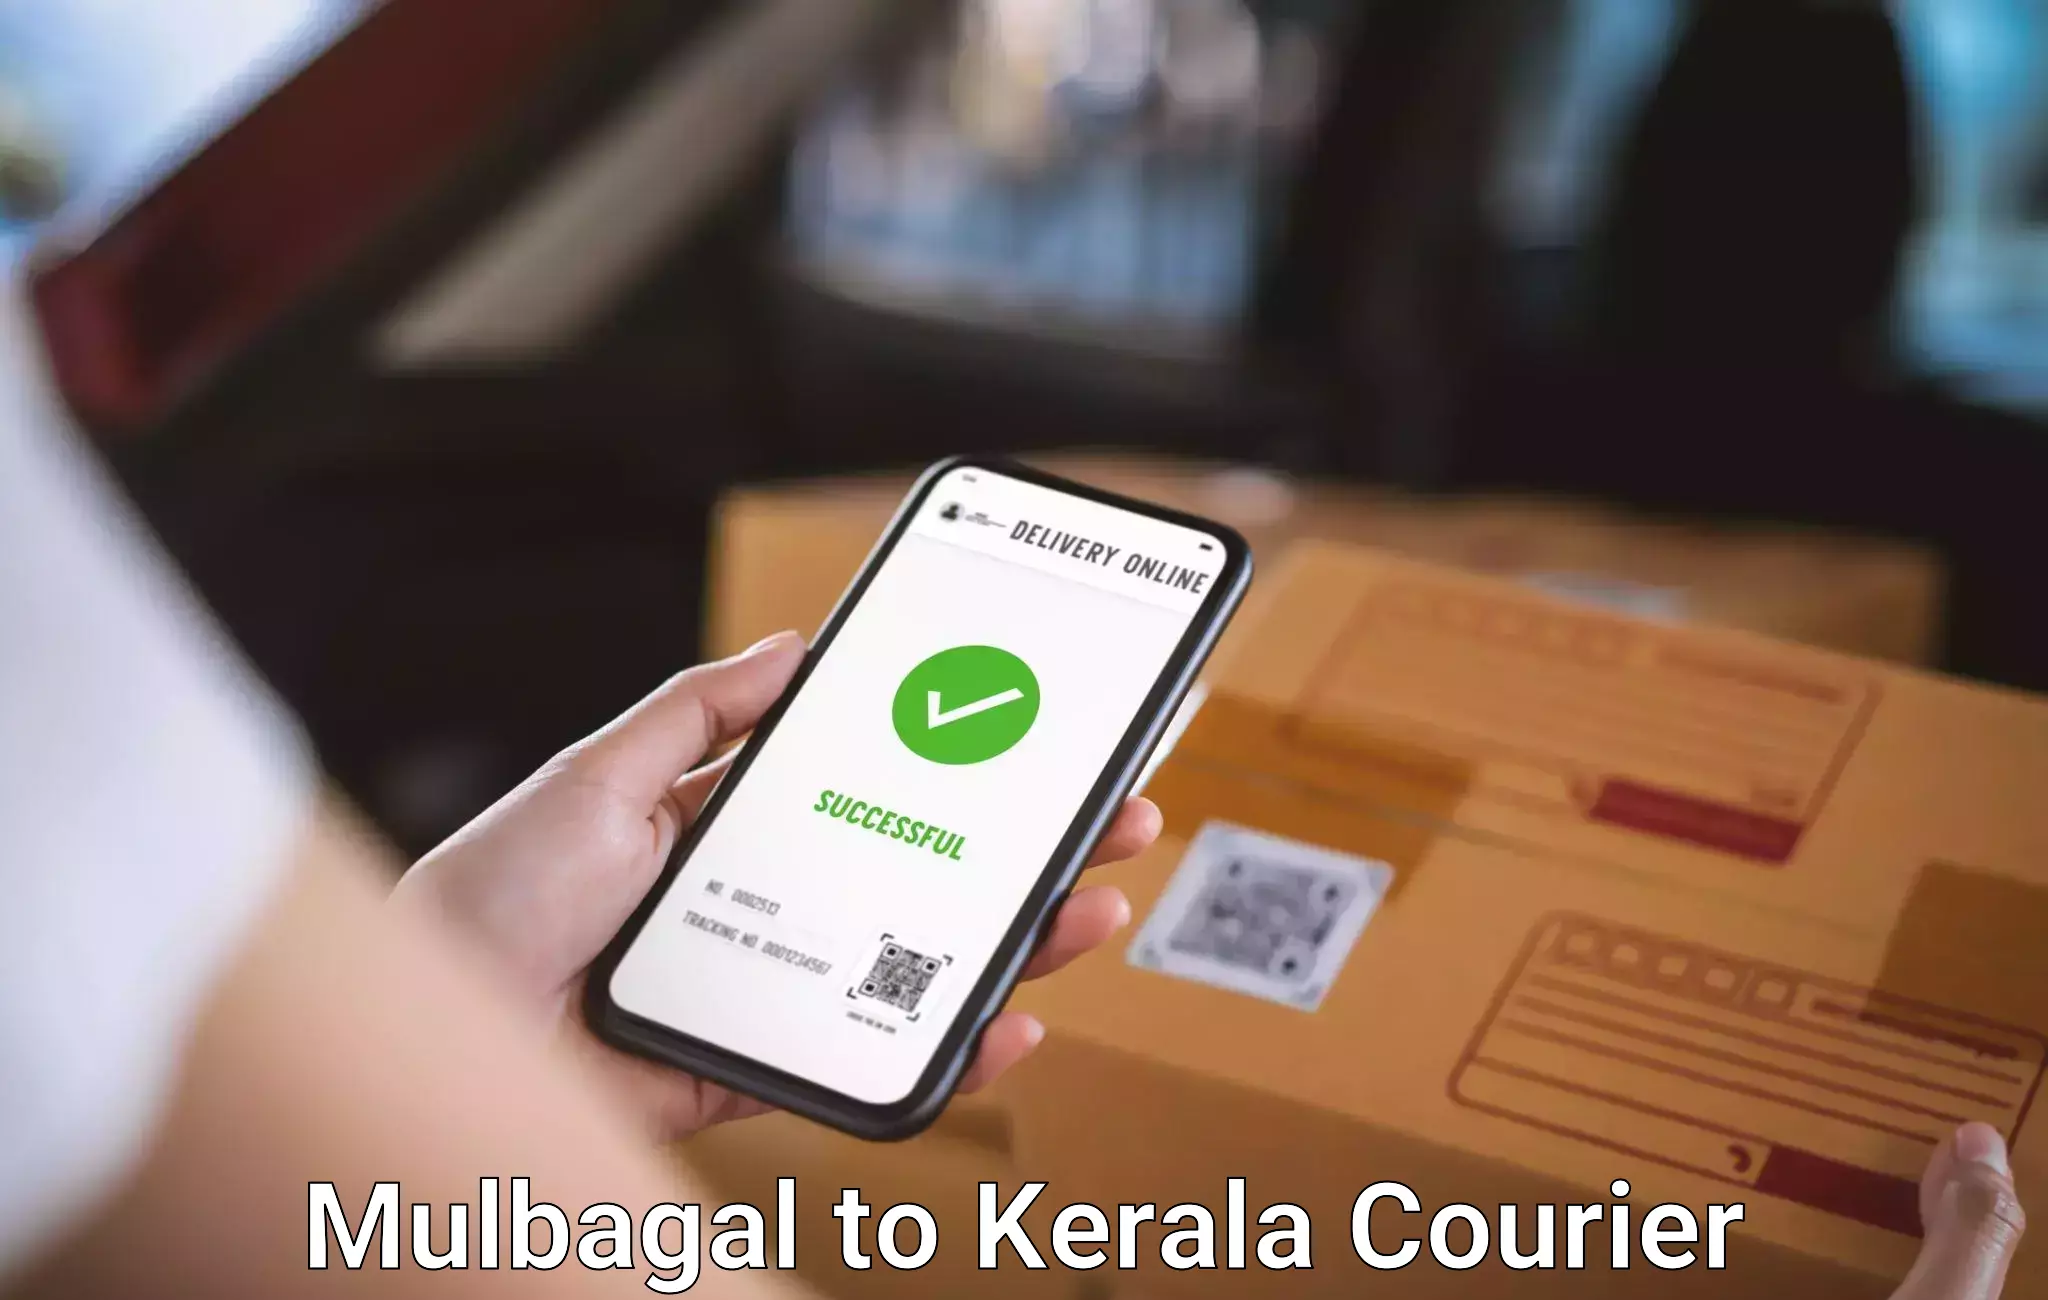 Luggage transport consultancy Mulbagal to Kerala